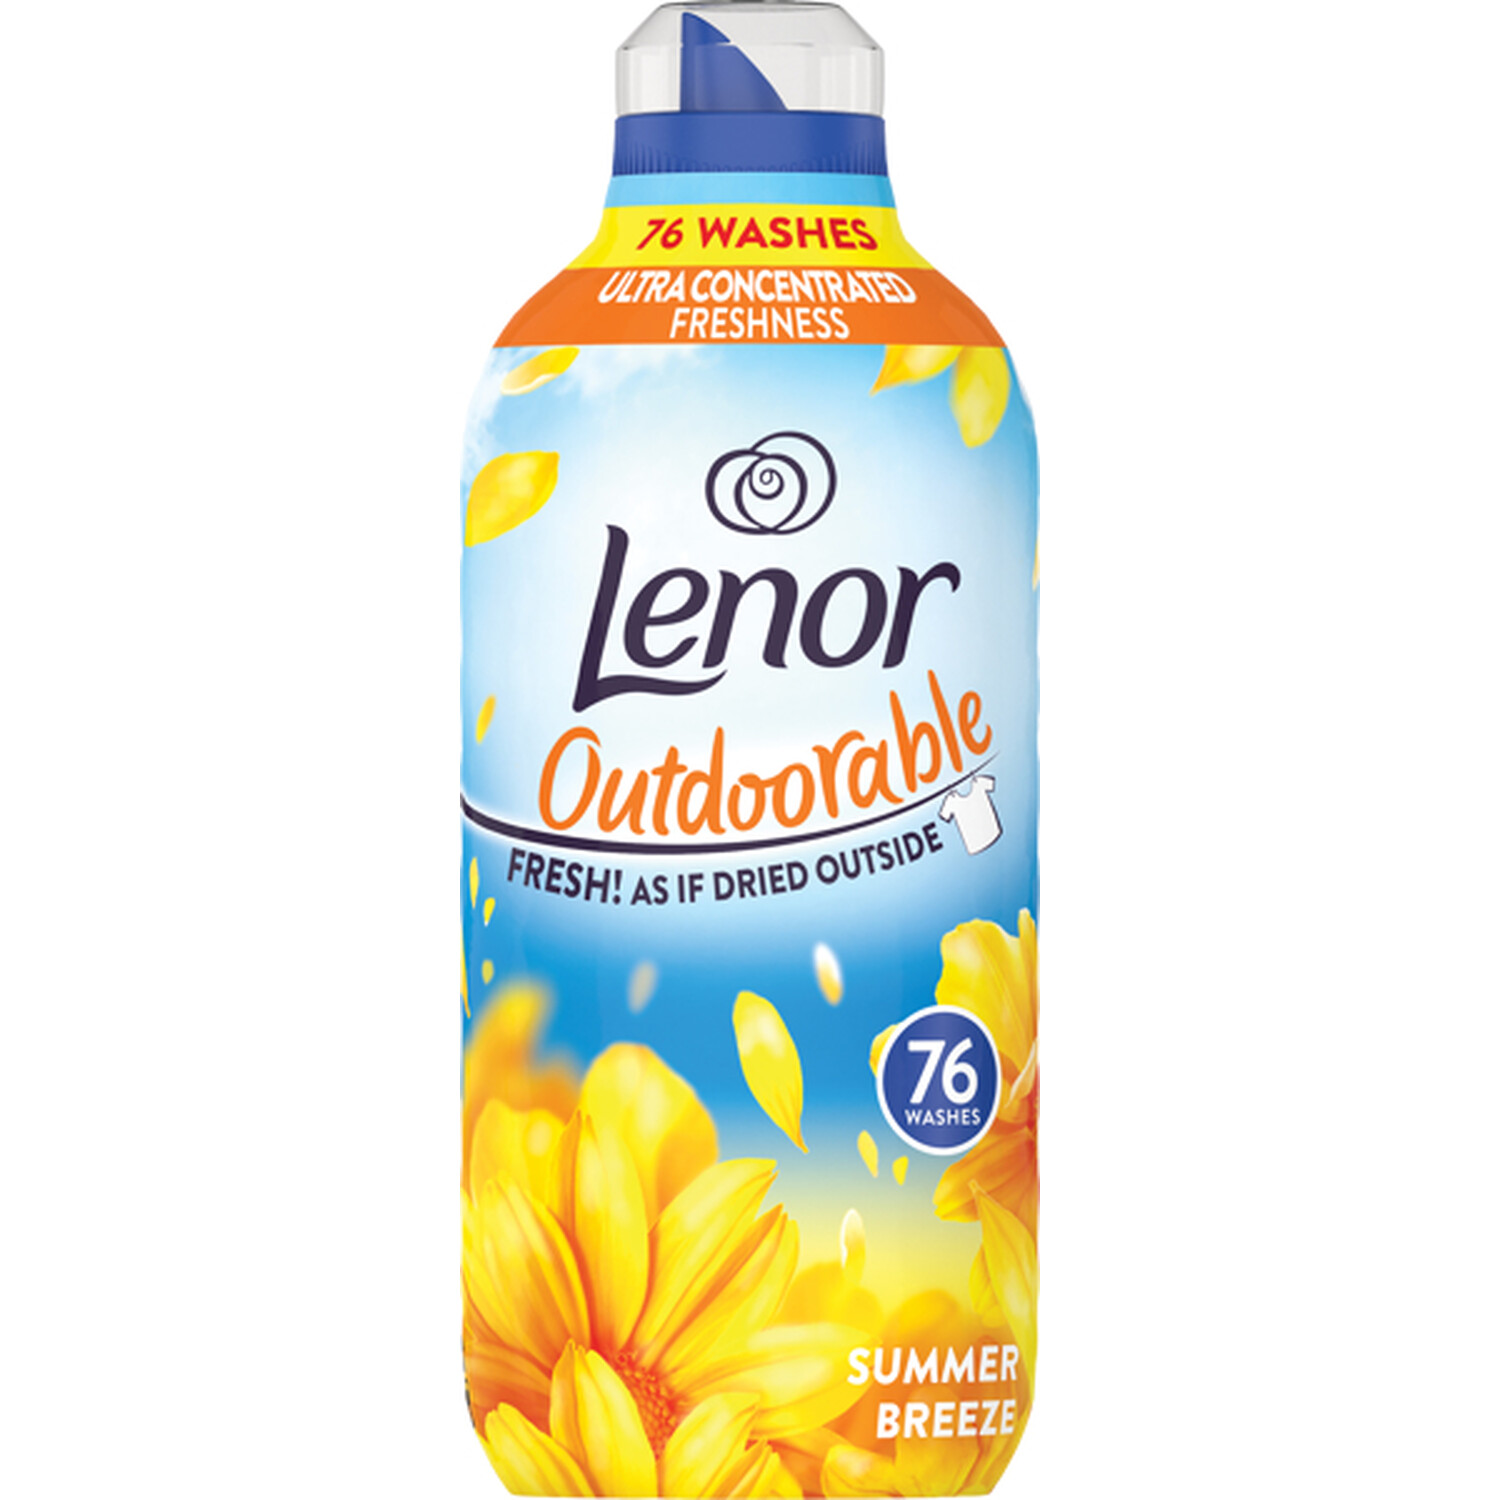 Lenor Summer Breeze Outdoorable Fabric Conditioner 1.06L 76 Washes Image